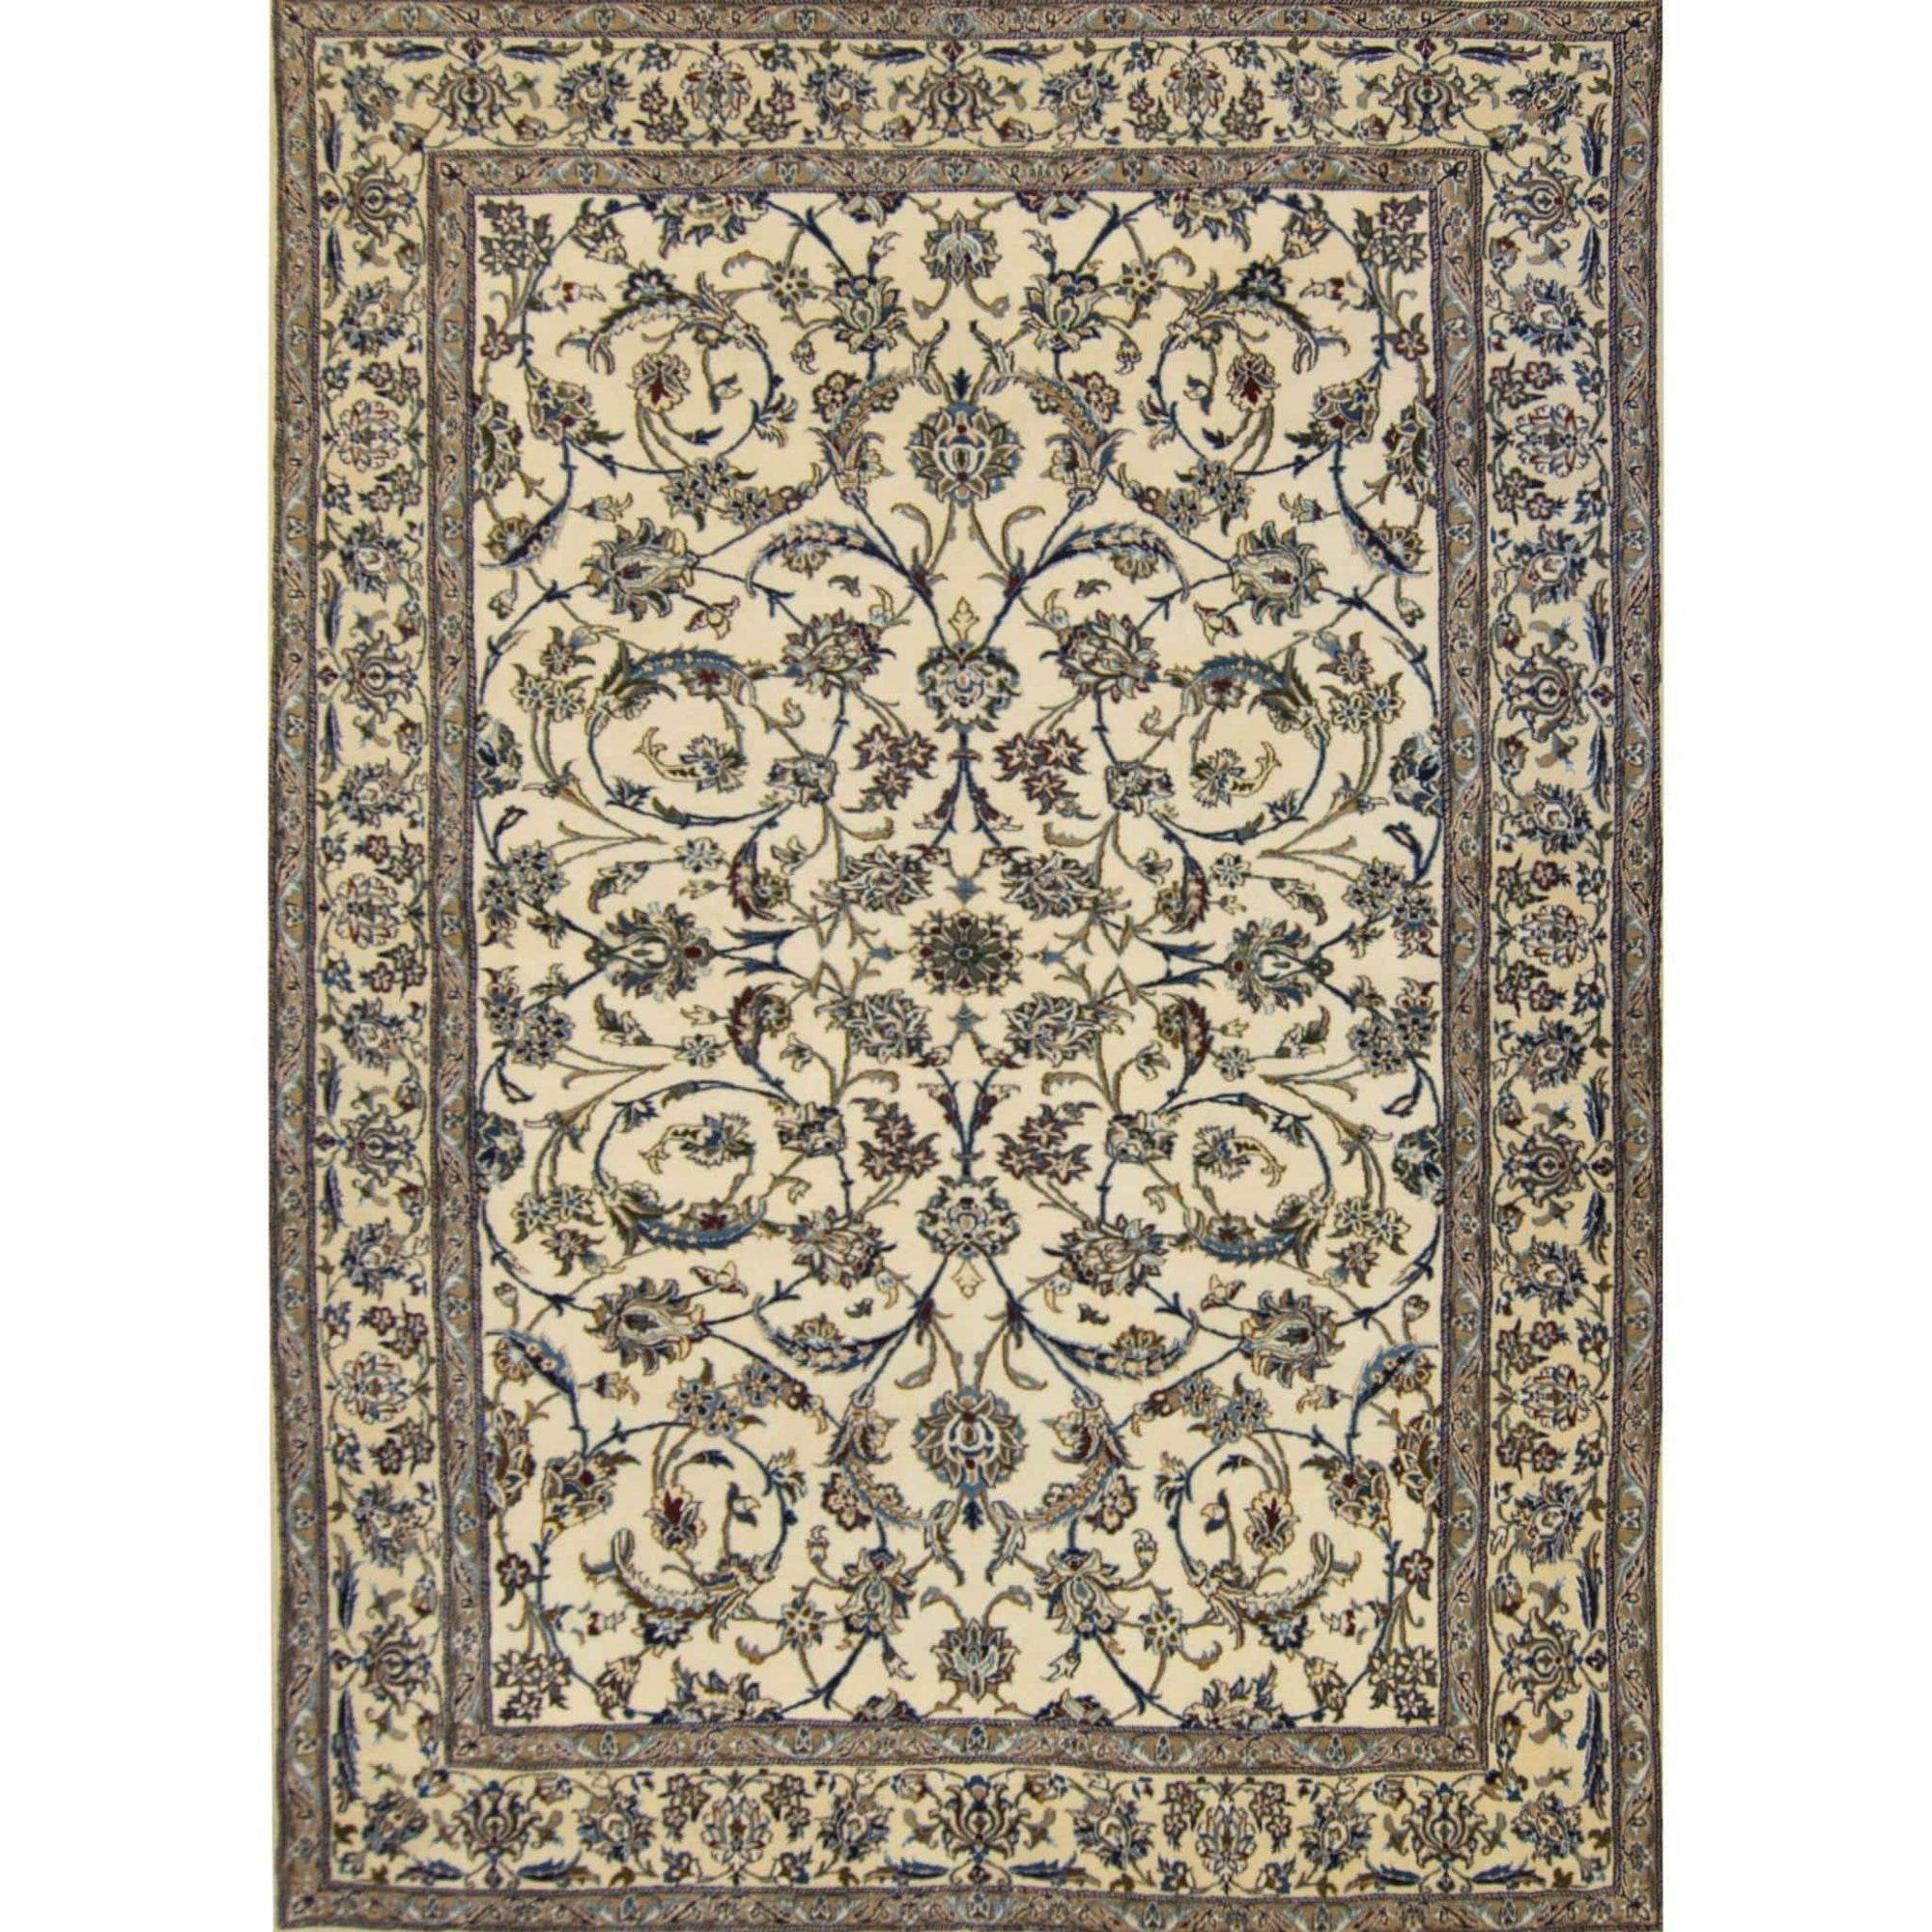 Authentic Fine Persian Hand-knotted Wool and Silk 9LAA Nain Rug 249cm x 345cm